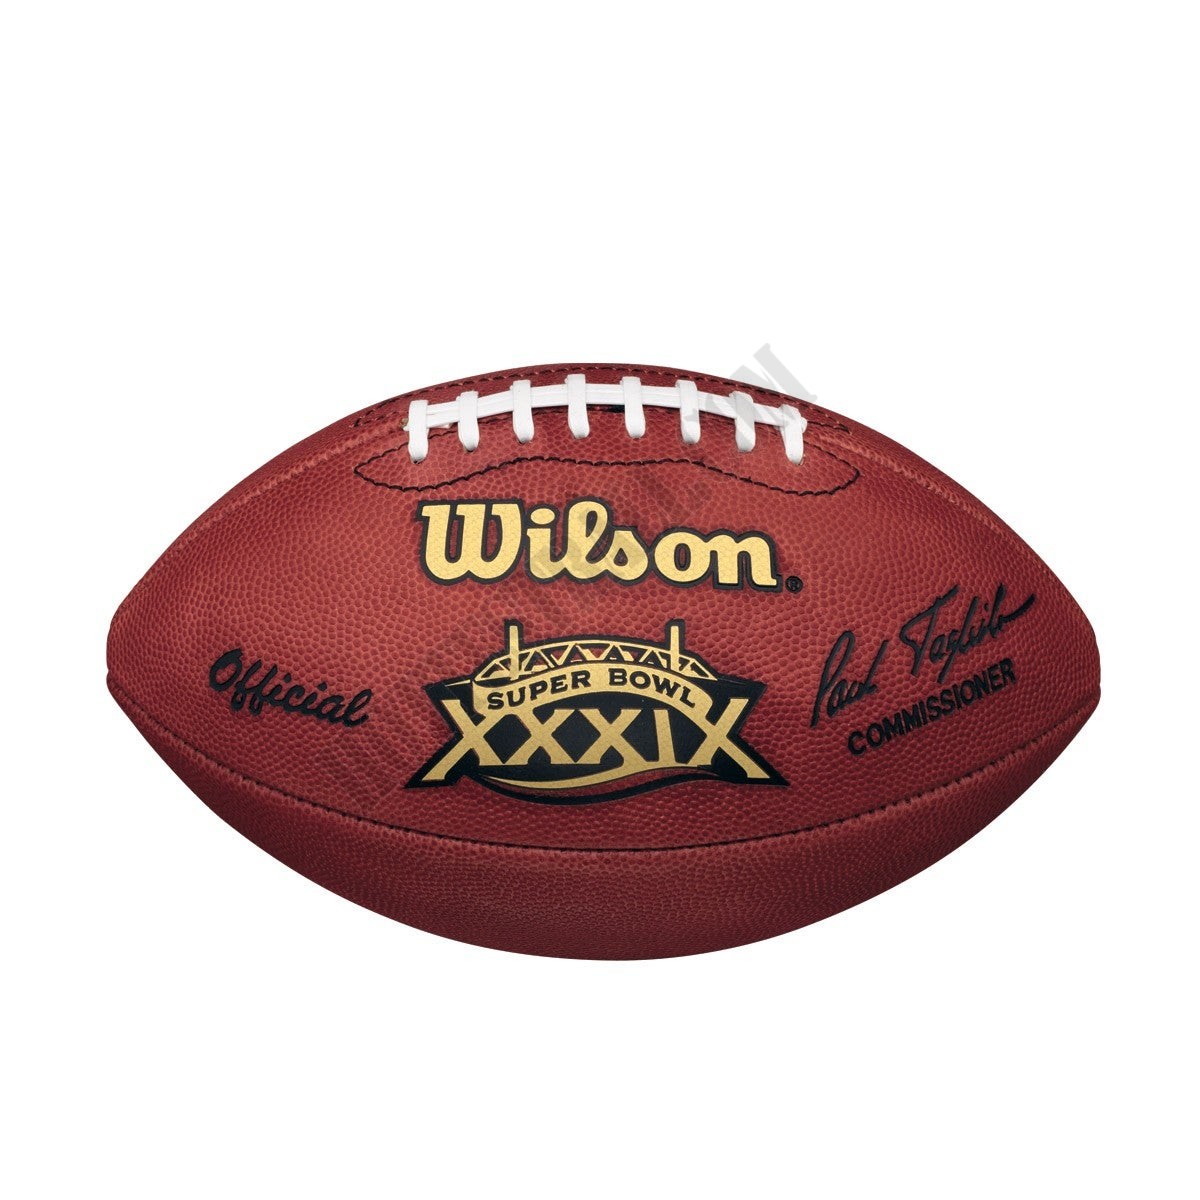 Super Bowl XXXIX Game Football - New England Patriots ● Wilson Promotions - -0